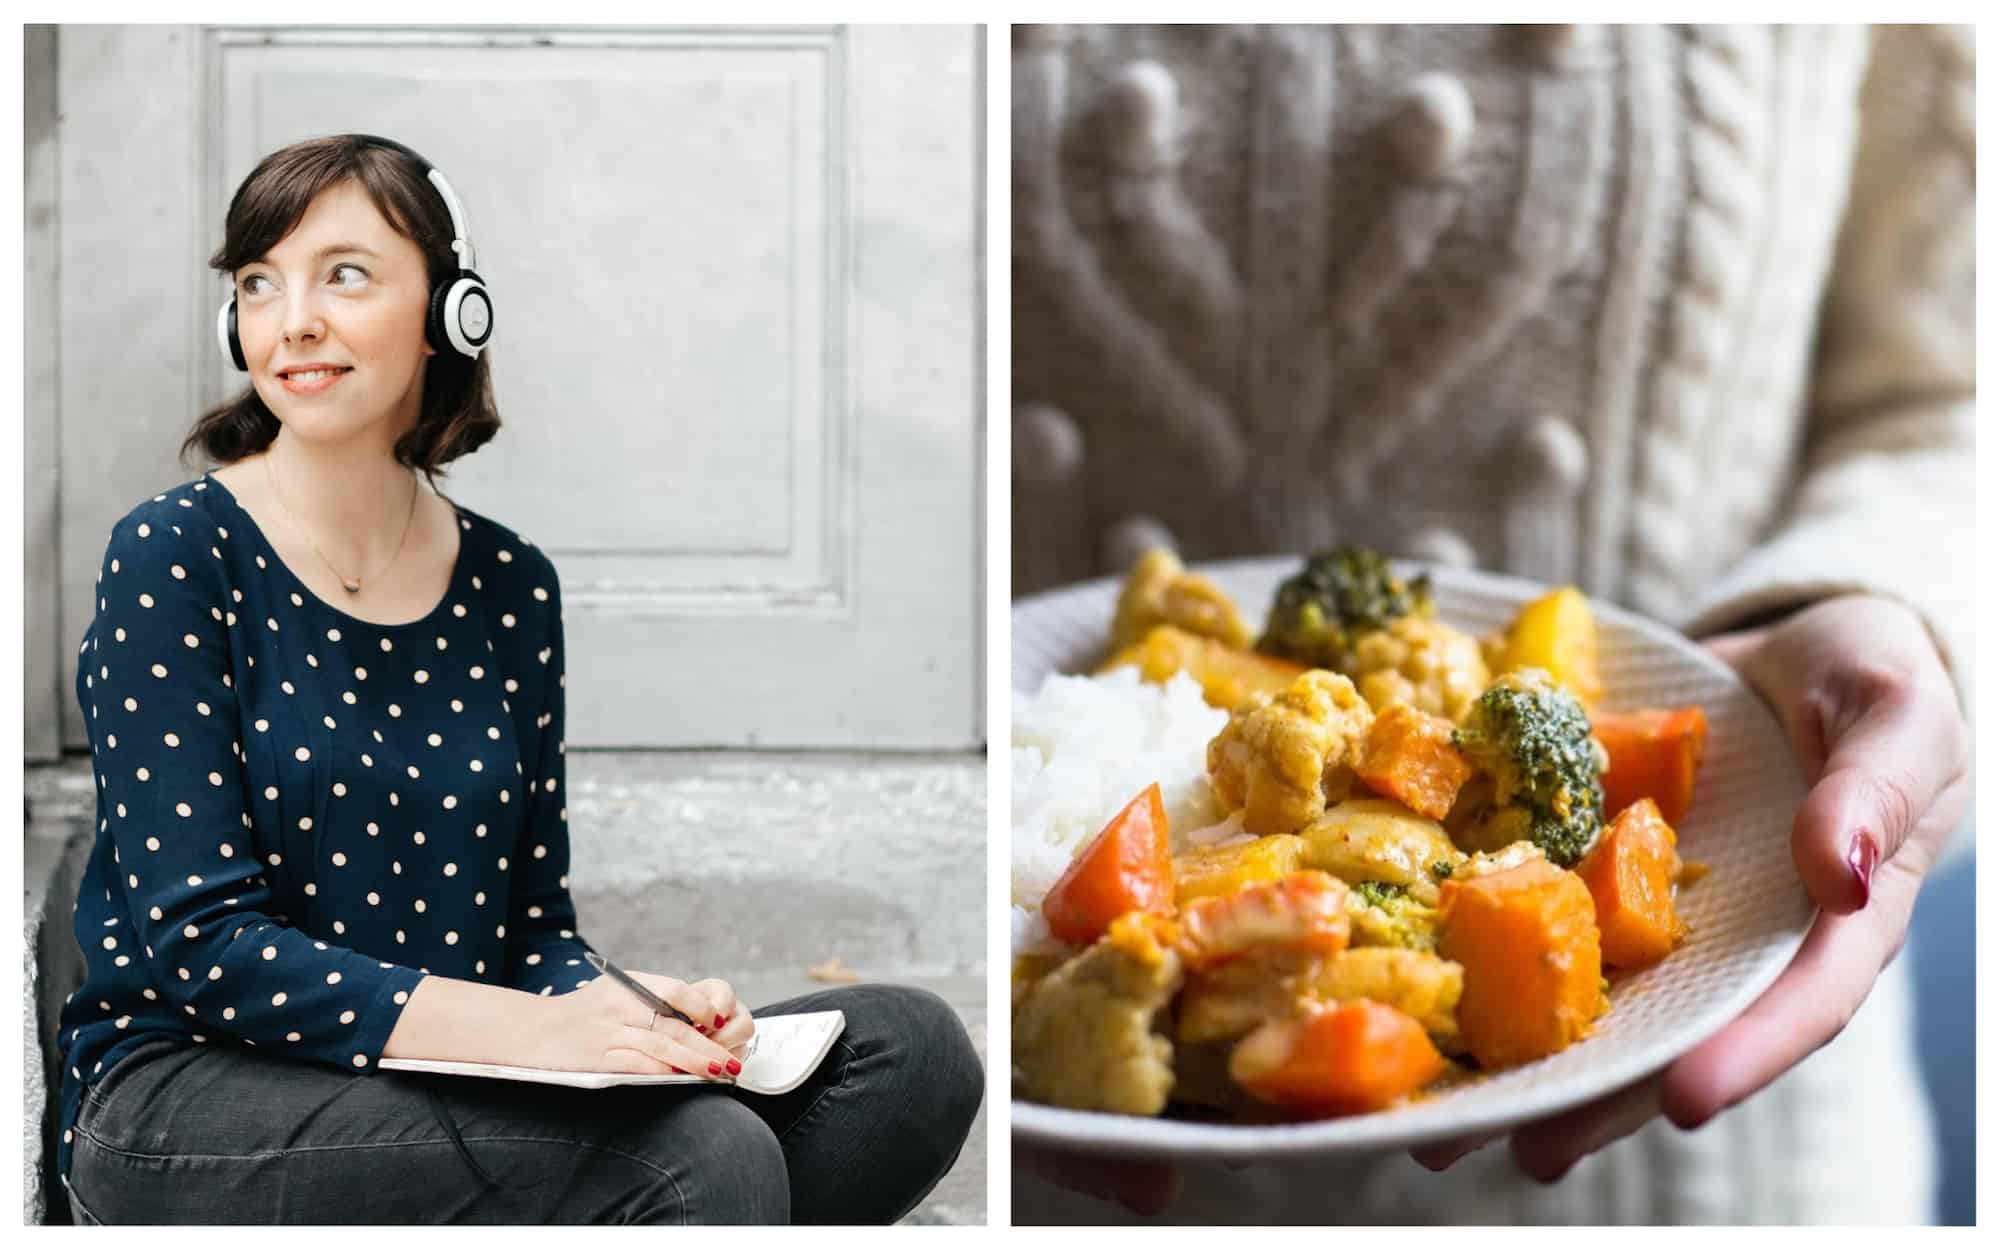 HiP Paris Blog rounds up the top French podcasts to listen to while you sit on the steps of a square somewhere in Paris, watching life go by, like this girl in a navy polka-dot top, smiling (left). They can also be useful in telling you where to go for the best food in Paris like this dish of curried vegetables being carried by a woman in a woolly sweater (right).